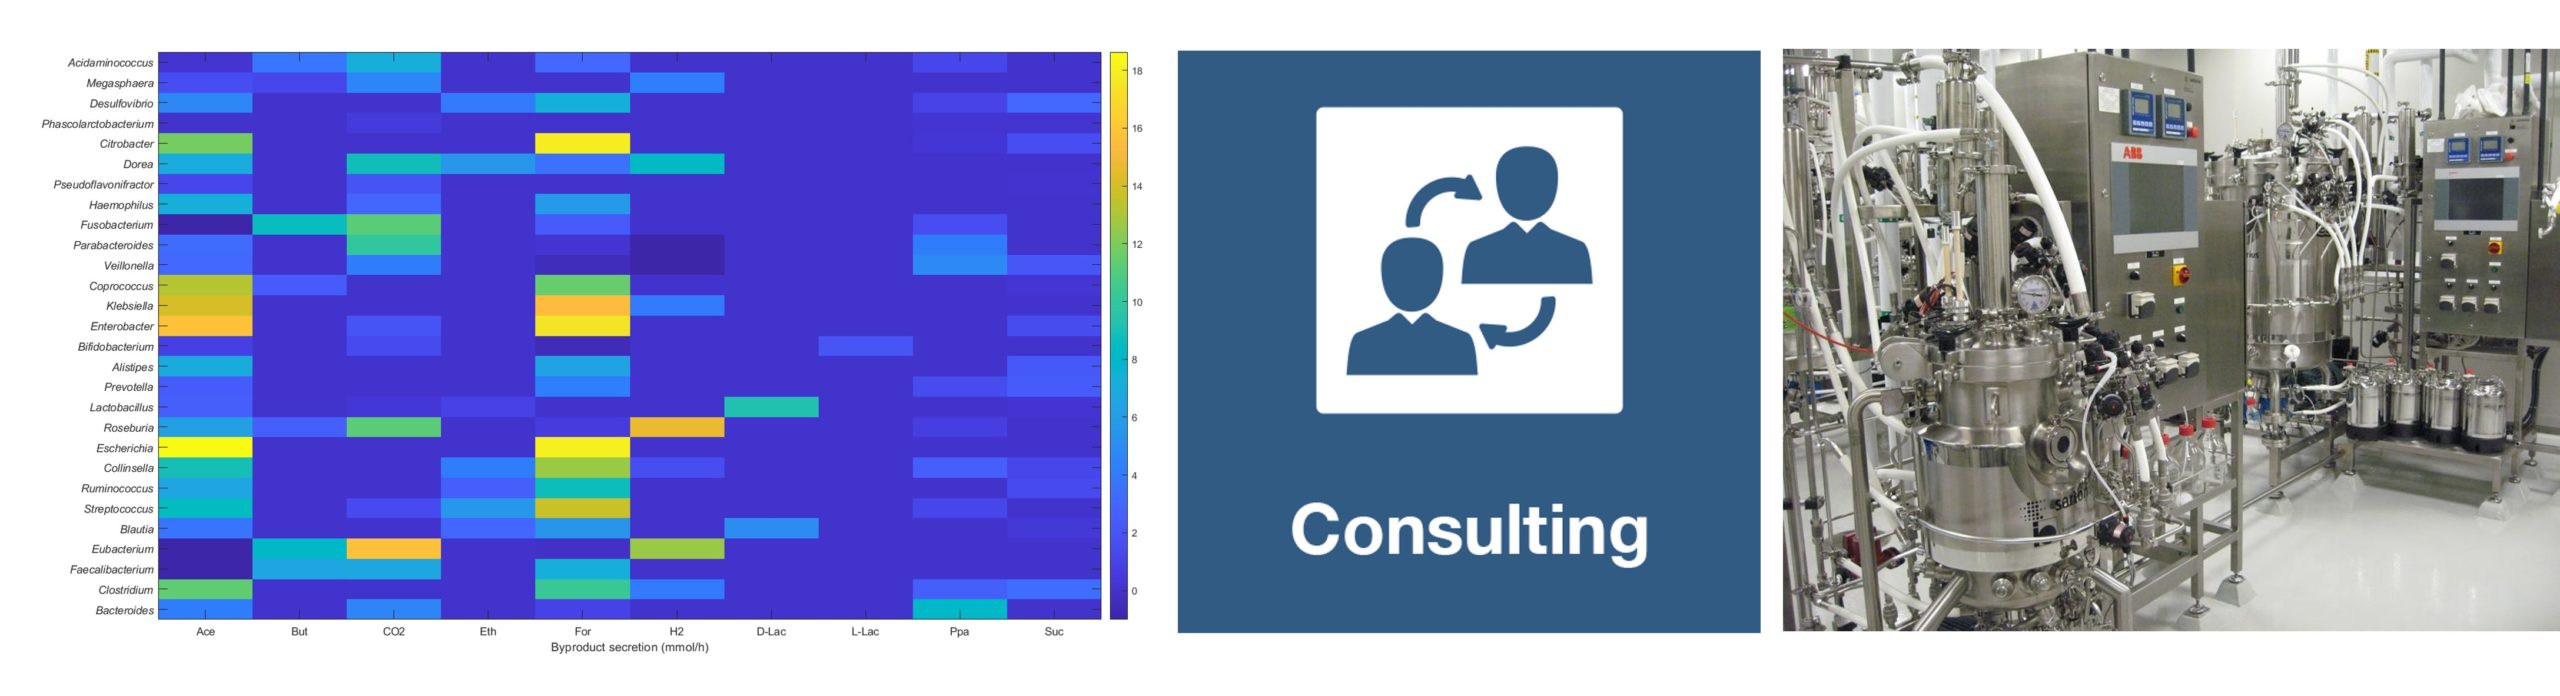 Metabolic modeling consulting